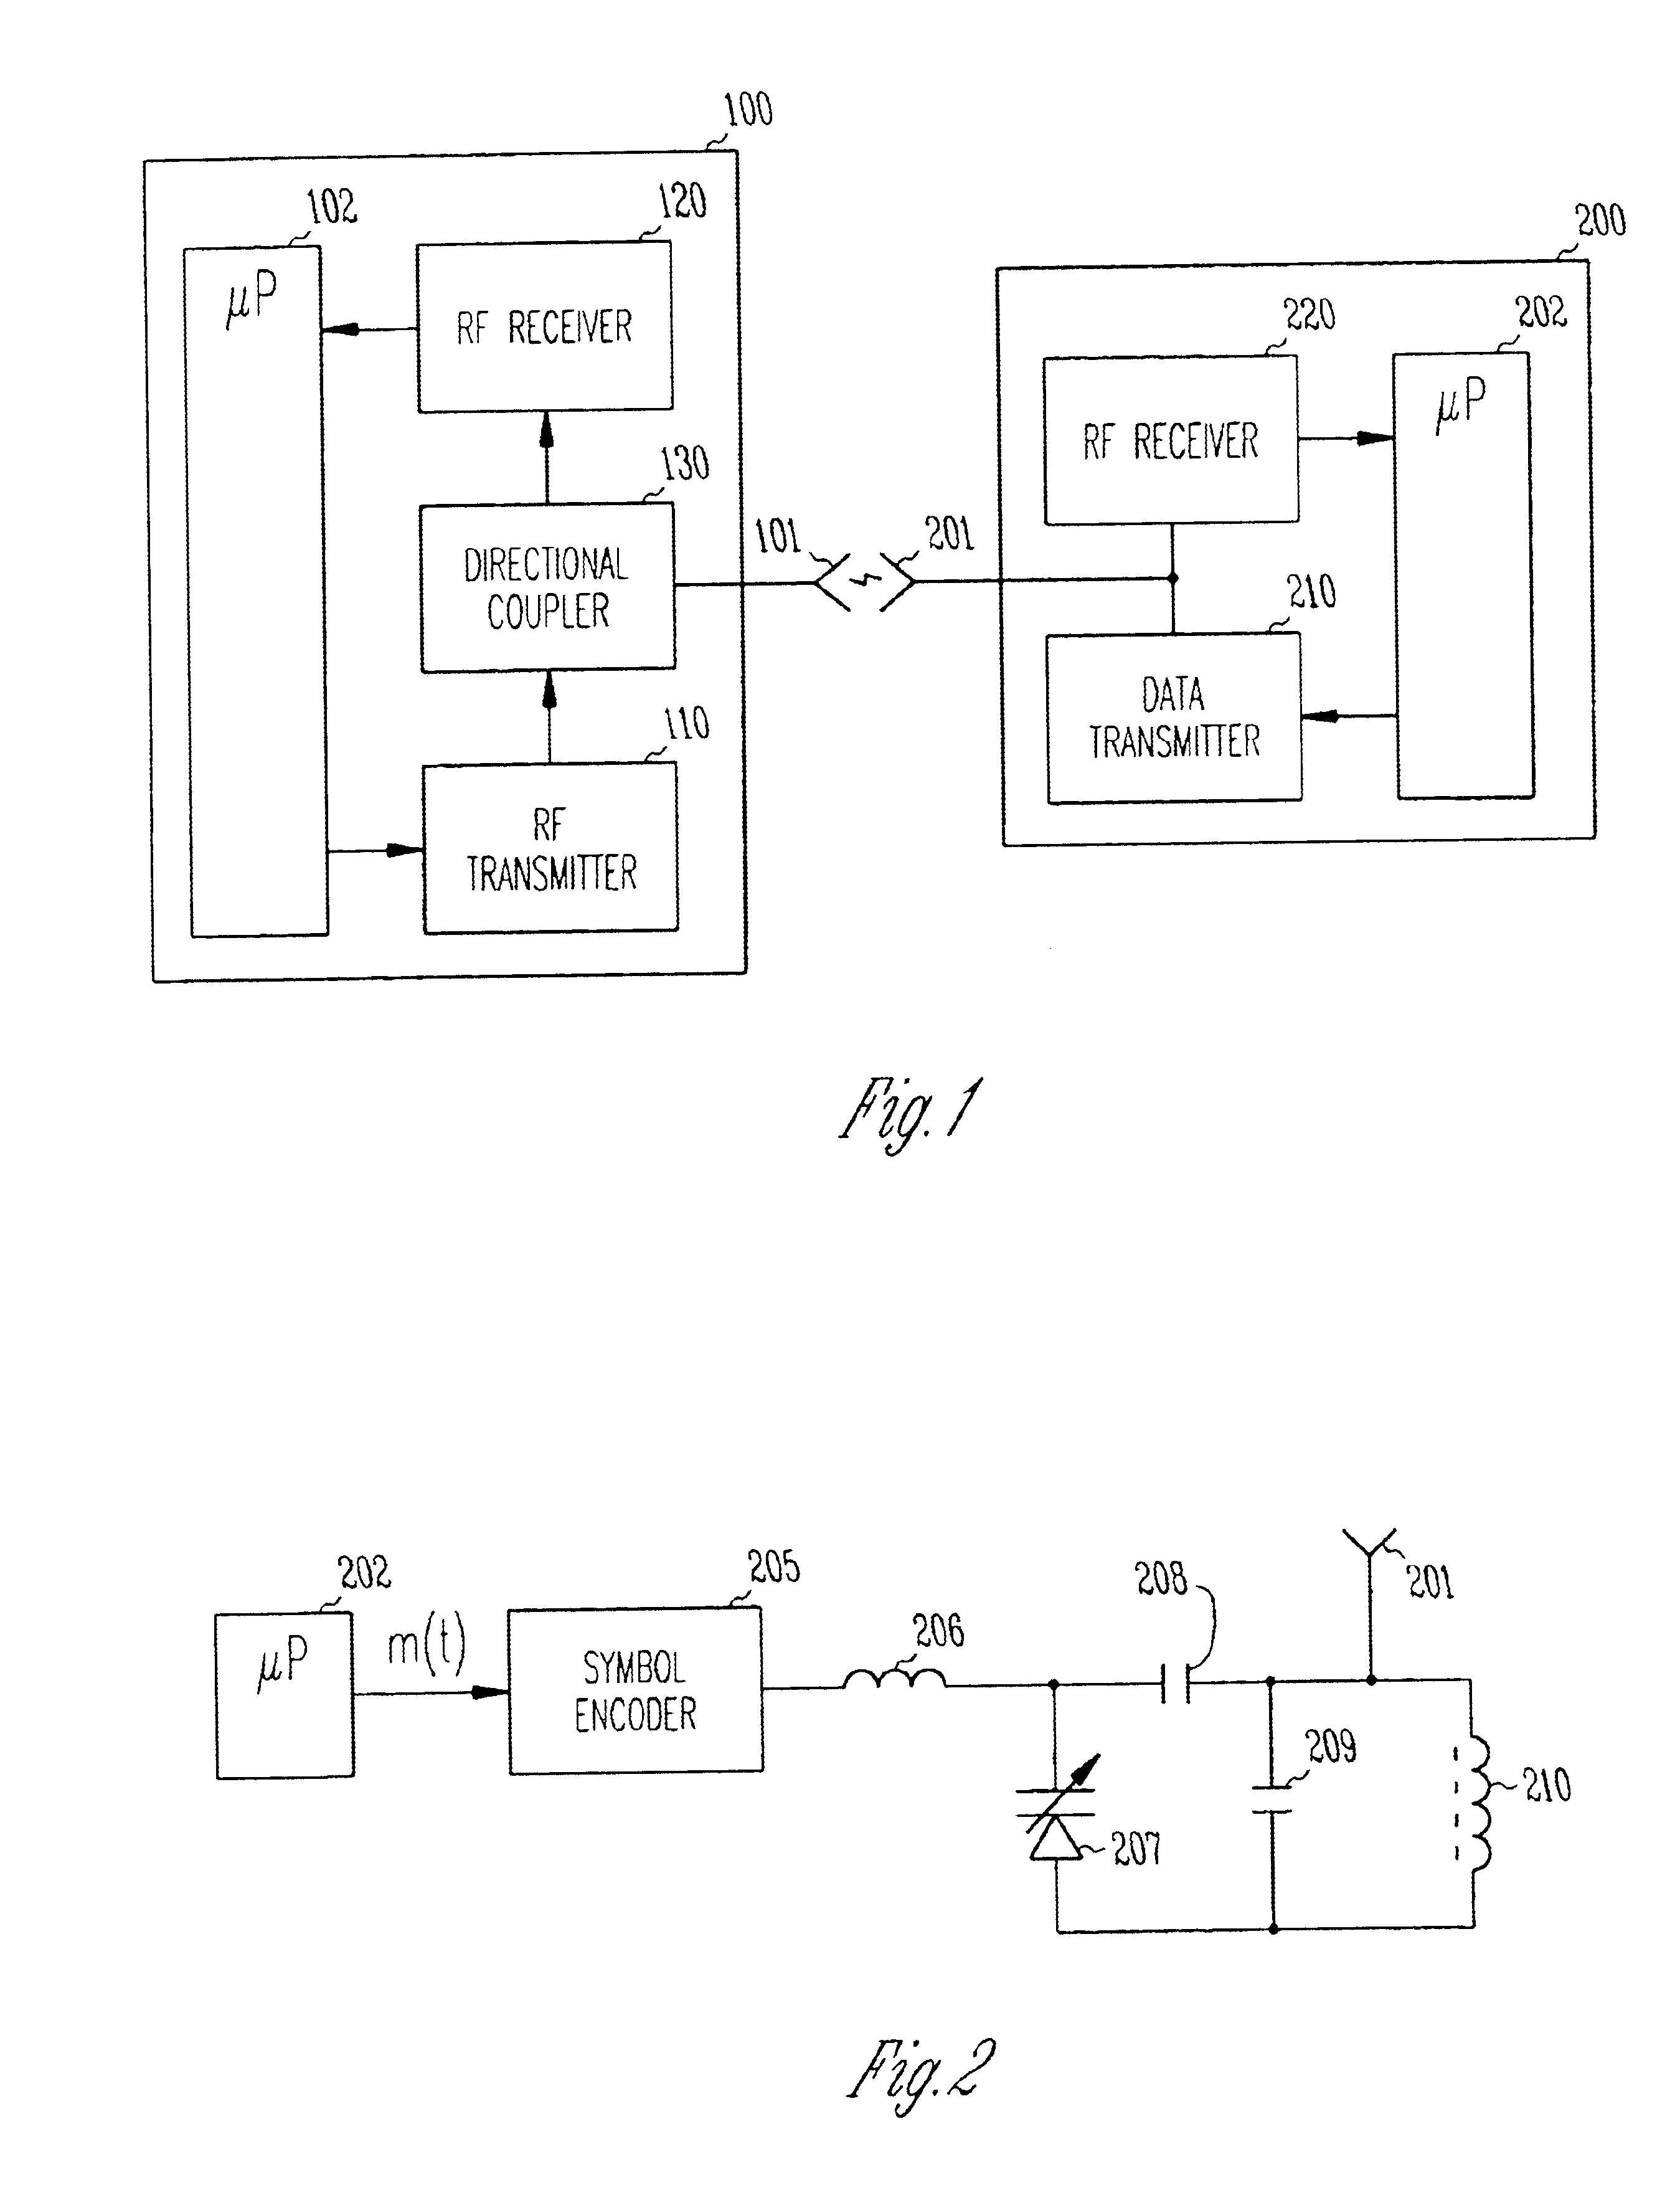 Passive telemetry system for implantable medical device